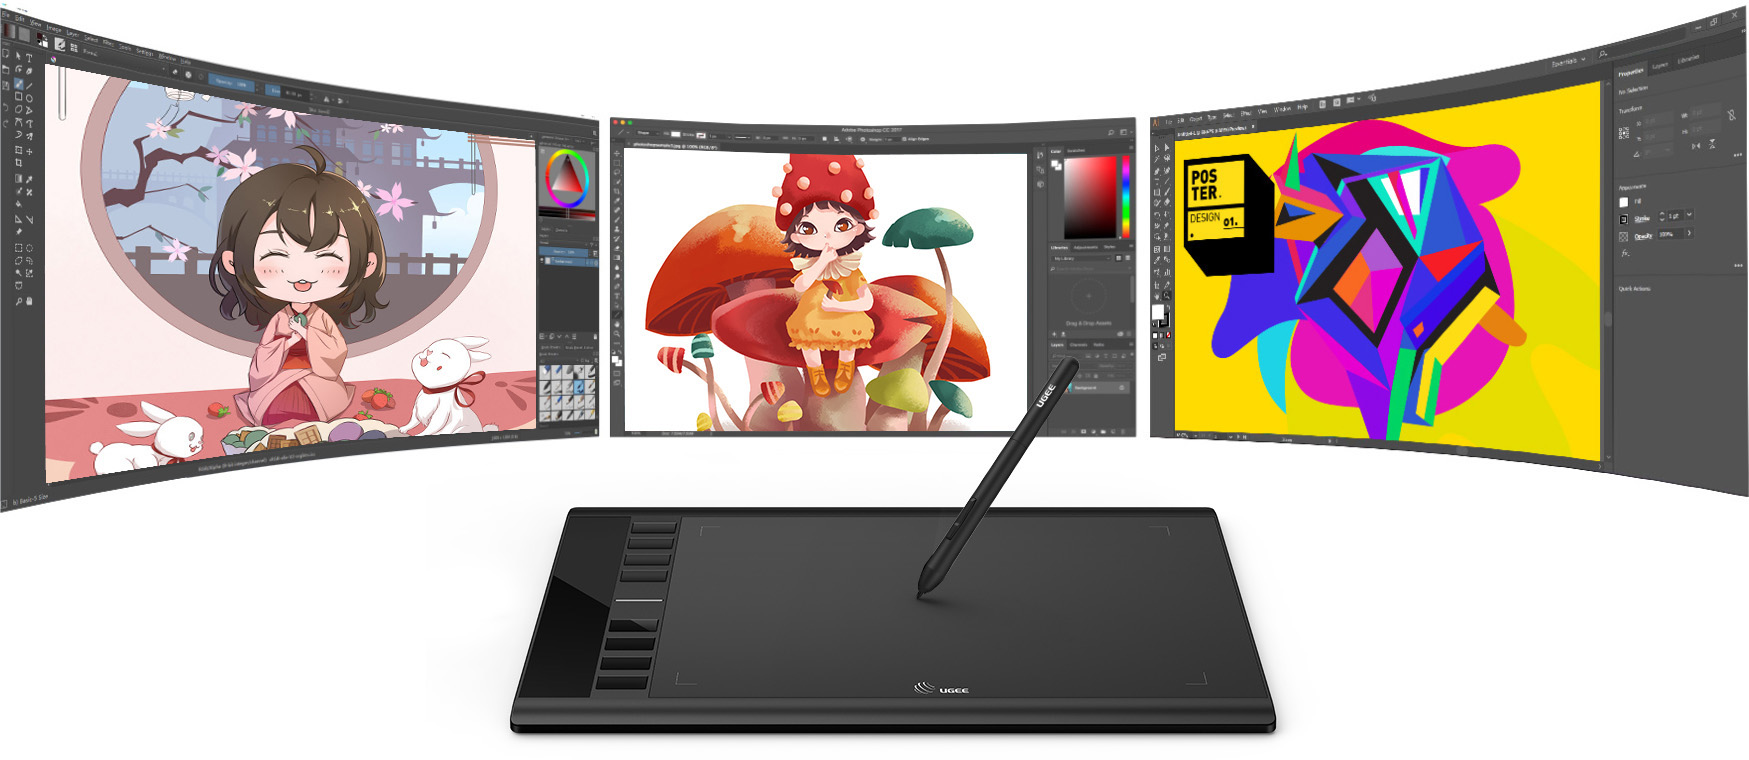 How To Use Ugee M708 Graphics Tablet